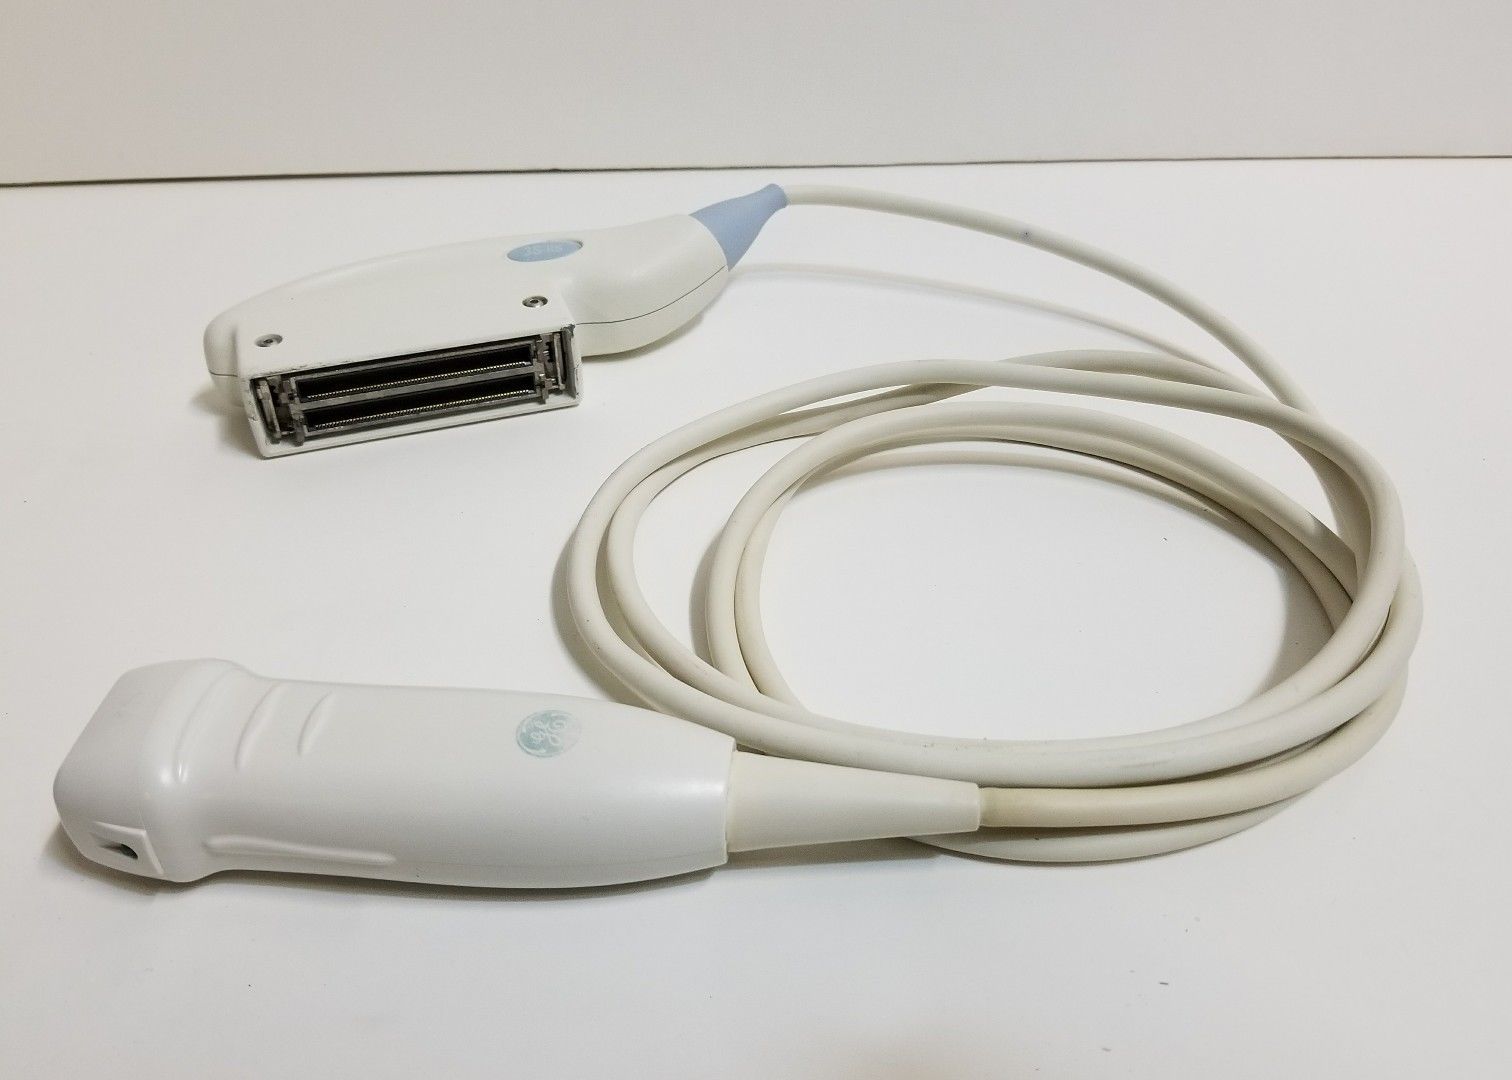 GE 3S-RS Ultrasound Transducer / Probe (Ref: 2355686) - Checked DIAGNOSTIC ULTRASOUND MACHINES FOR SALE